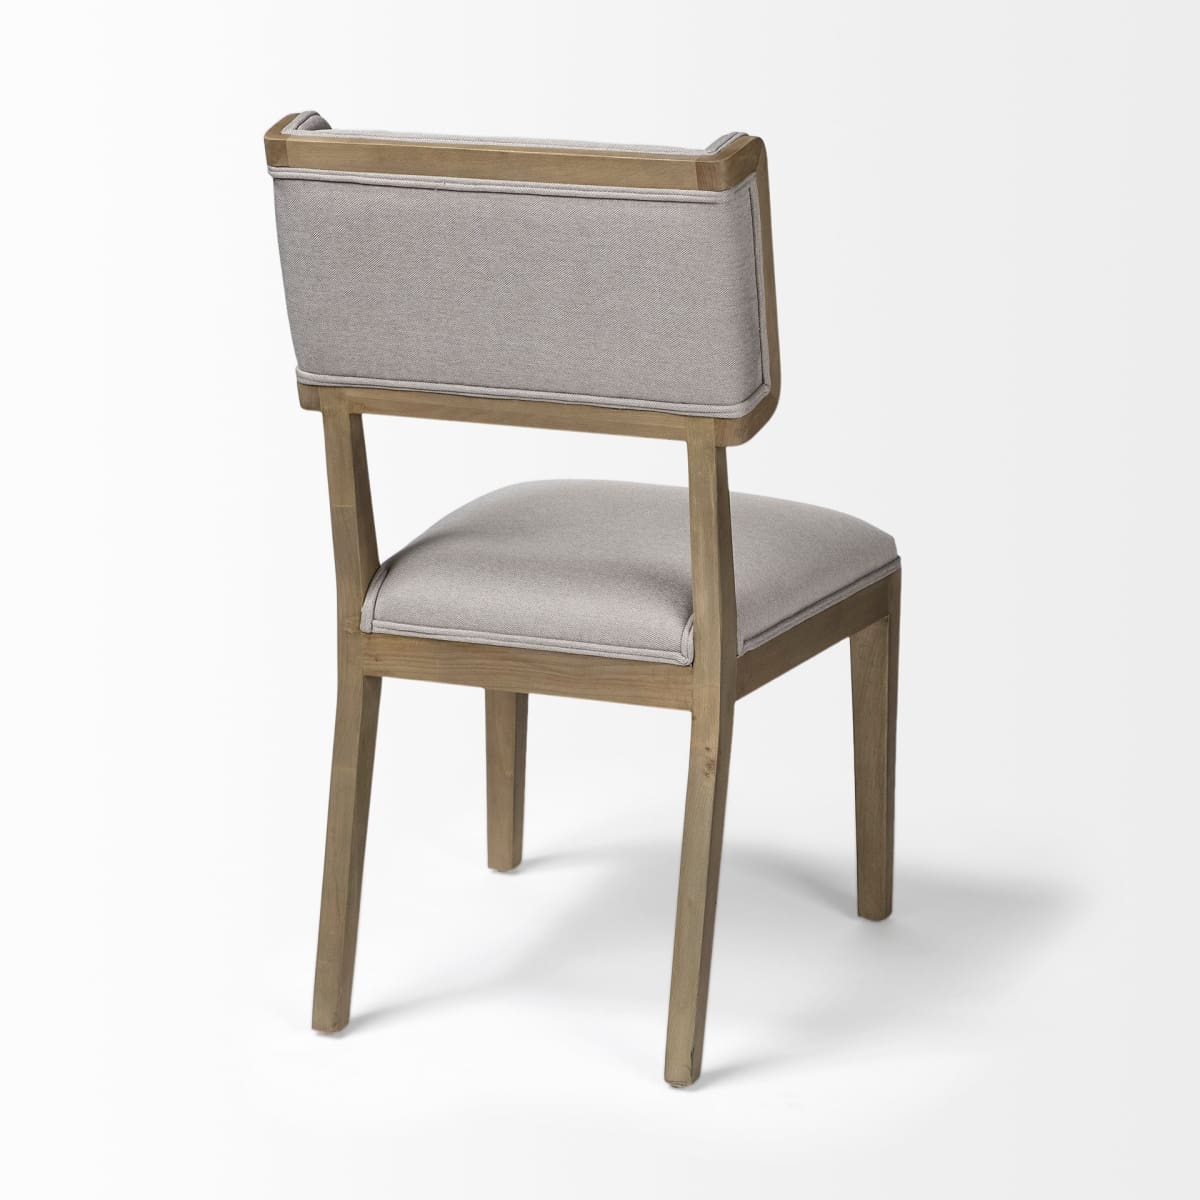 Tenton Dining Chair Gray Fabric | Brown Wood - dining-chairs